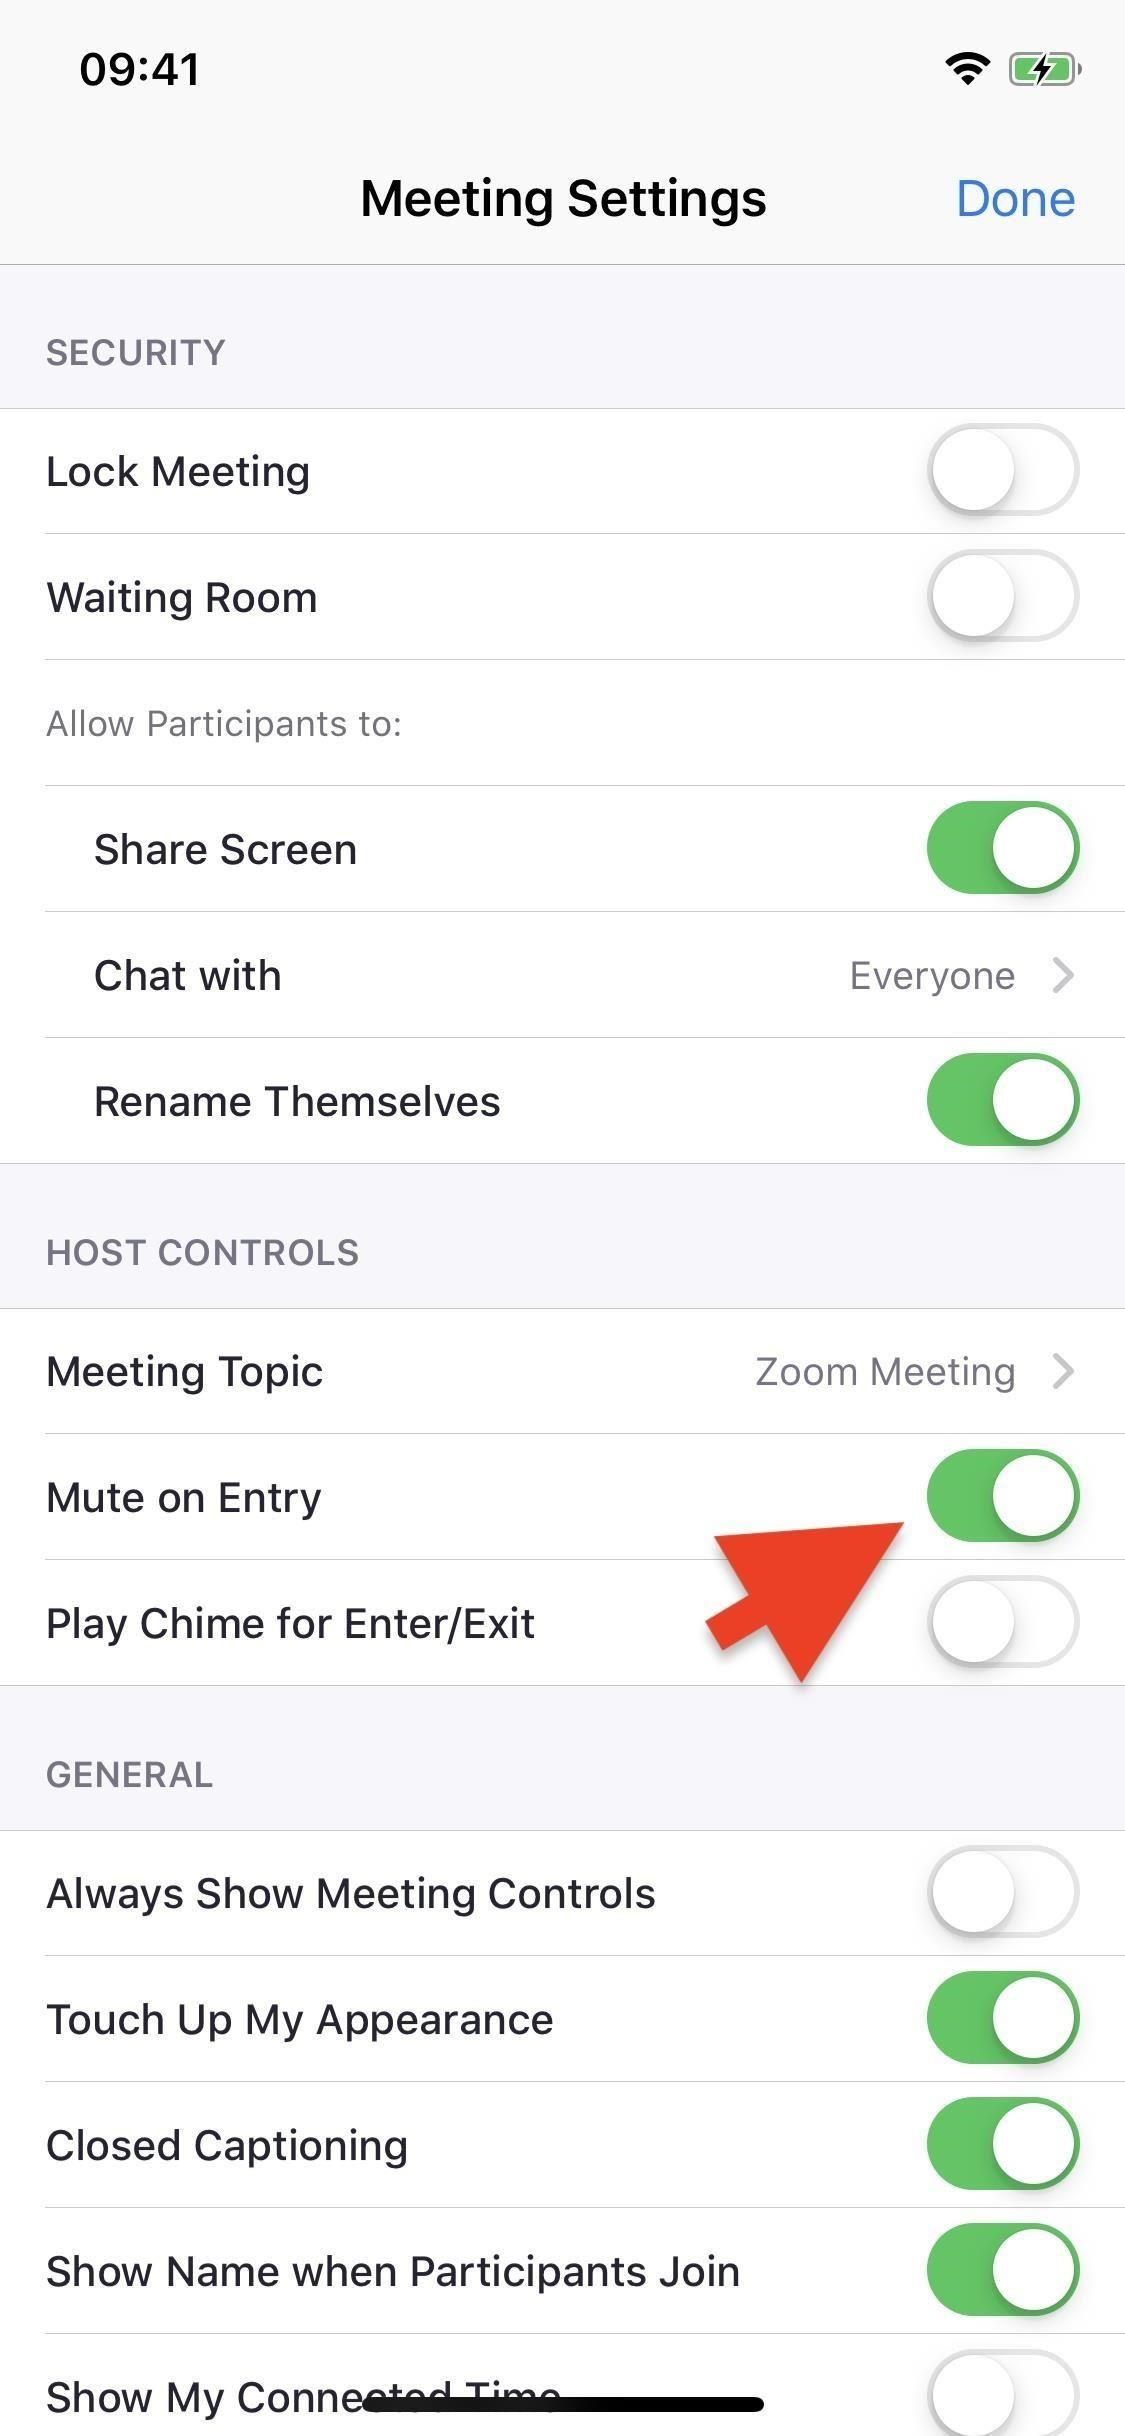 Change These 30 Settings to Stop Zoombombing & Other Interruptions in Your Zoom Meetings